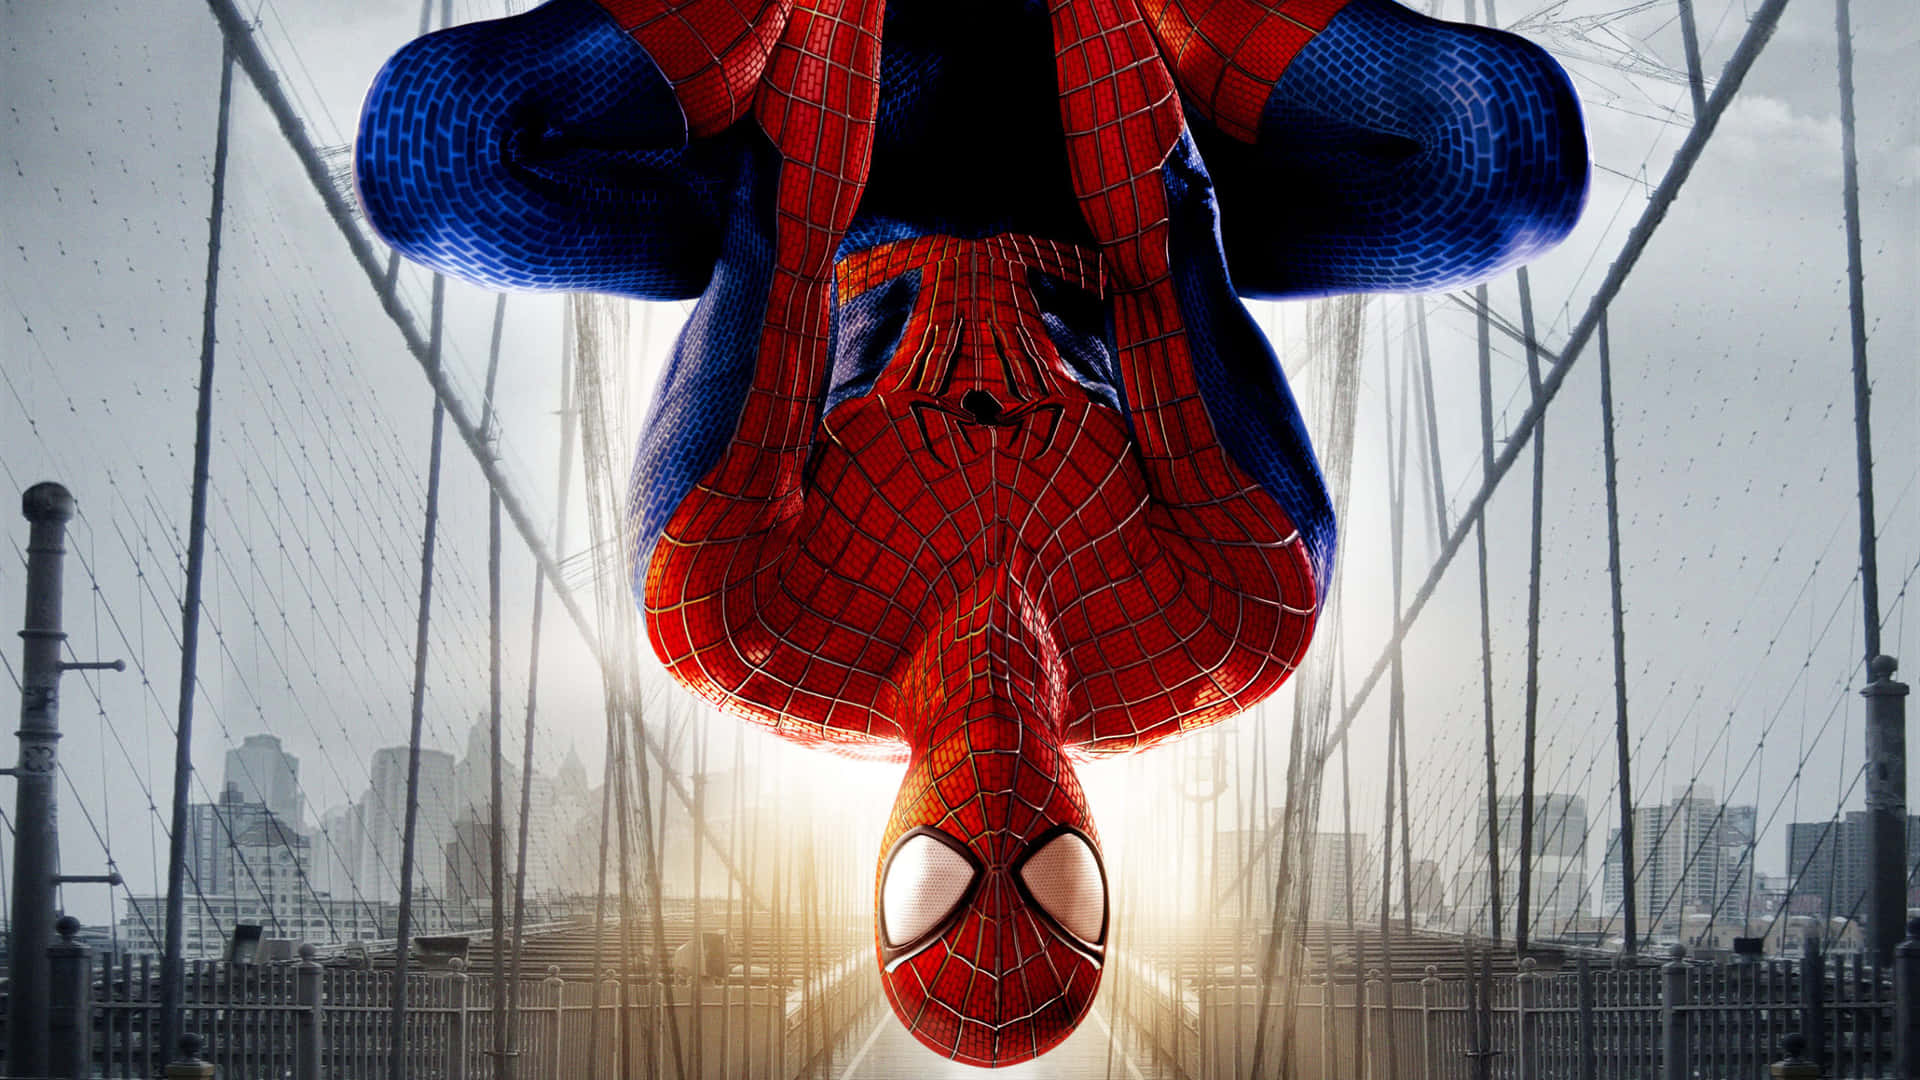 Marvel's Spider-Man Trilogy: 3 Movies, 3 Heroes Wallpaper